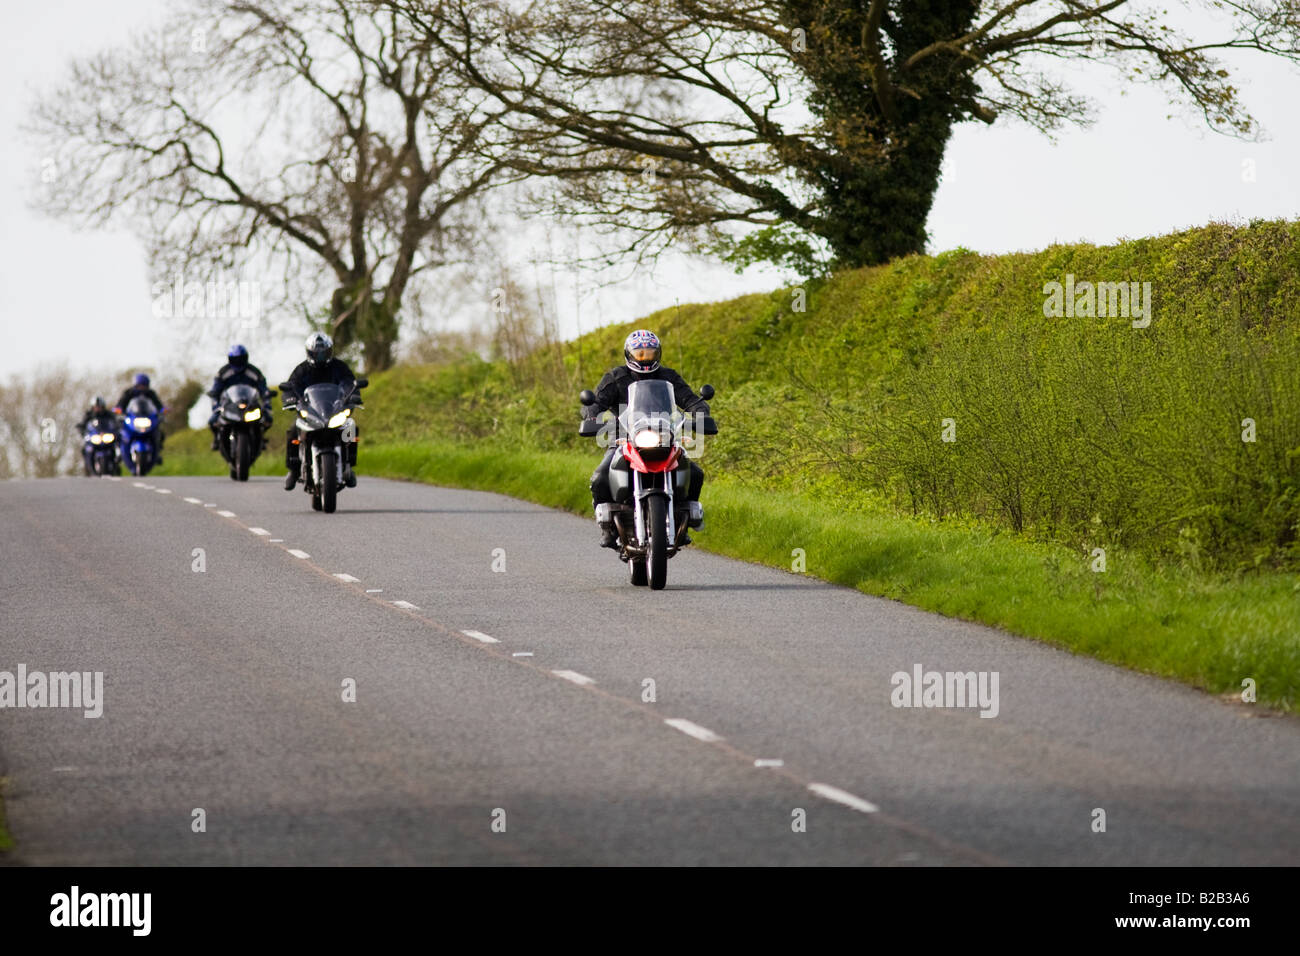 Motocyclistes sur country road Stow On The Wold Oxfordshire Royaume-Uni Banque D'Images